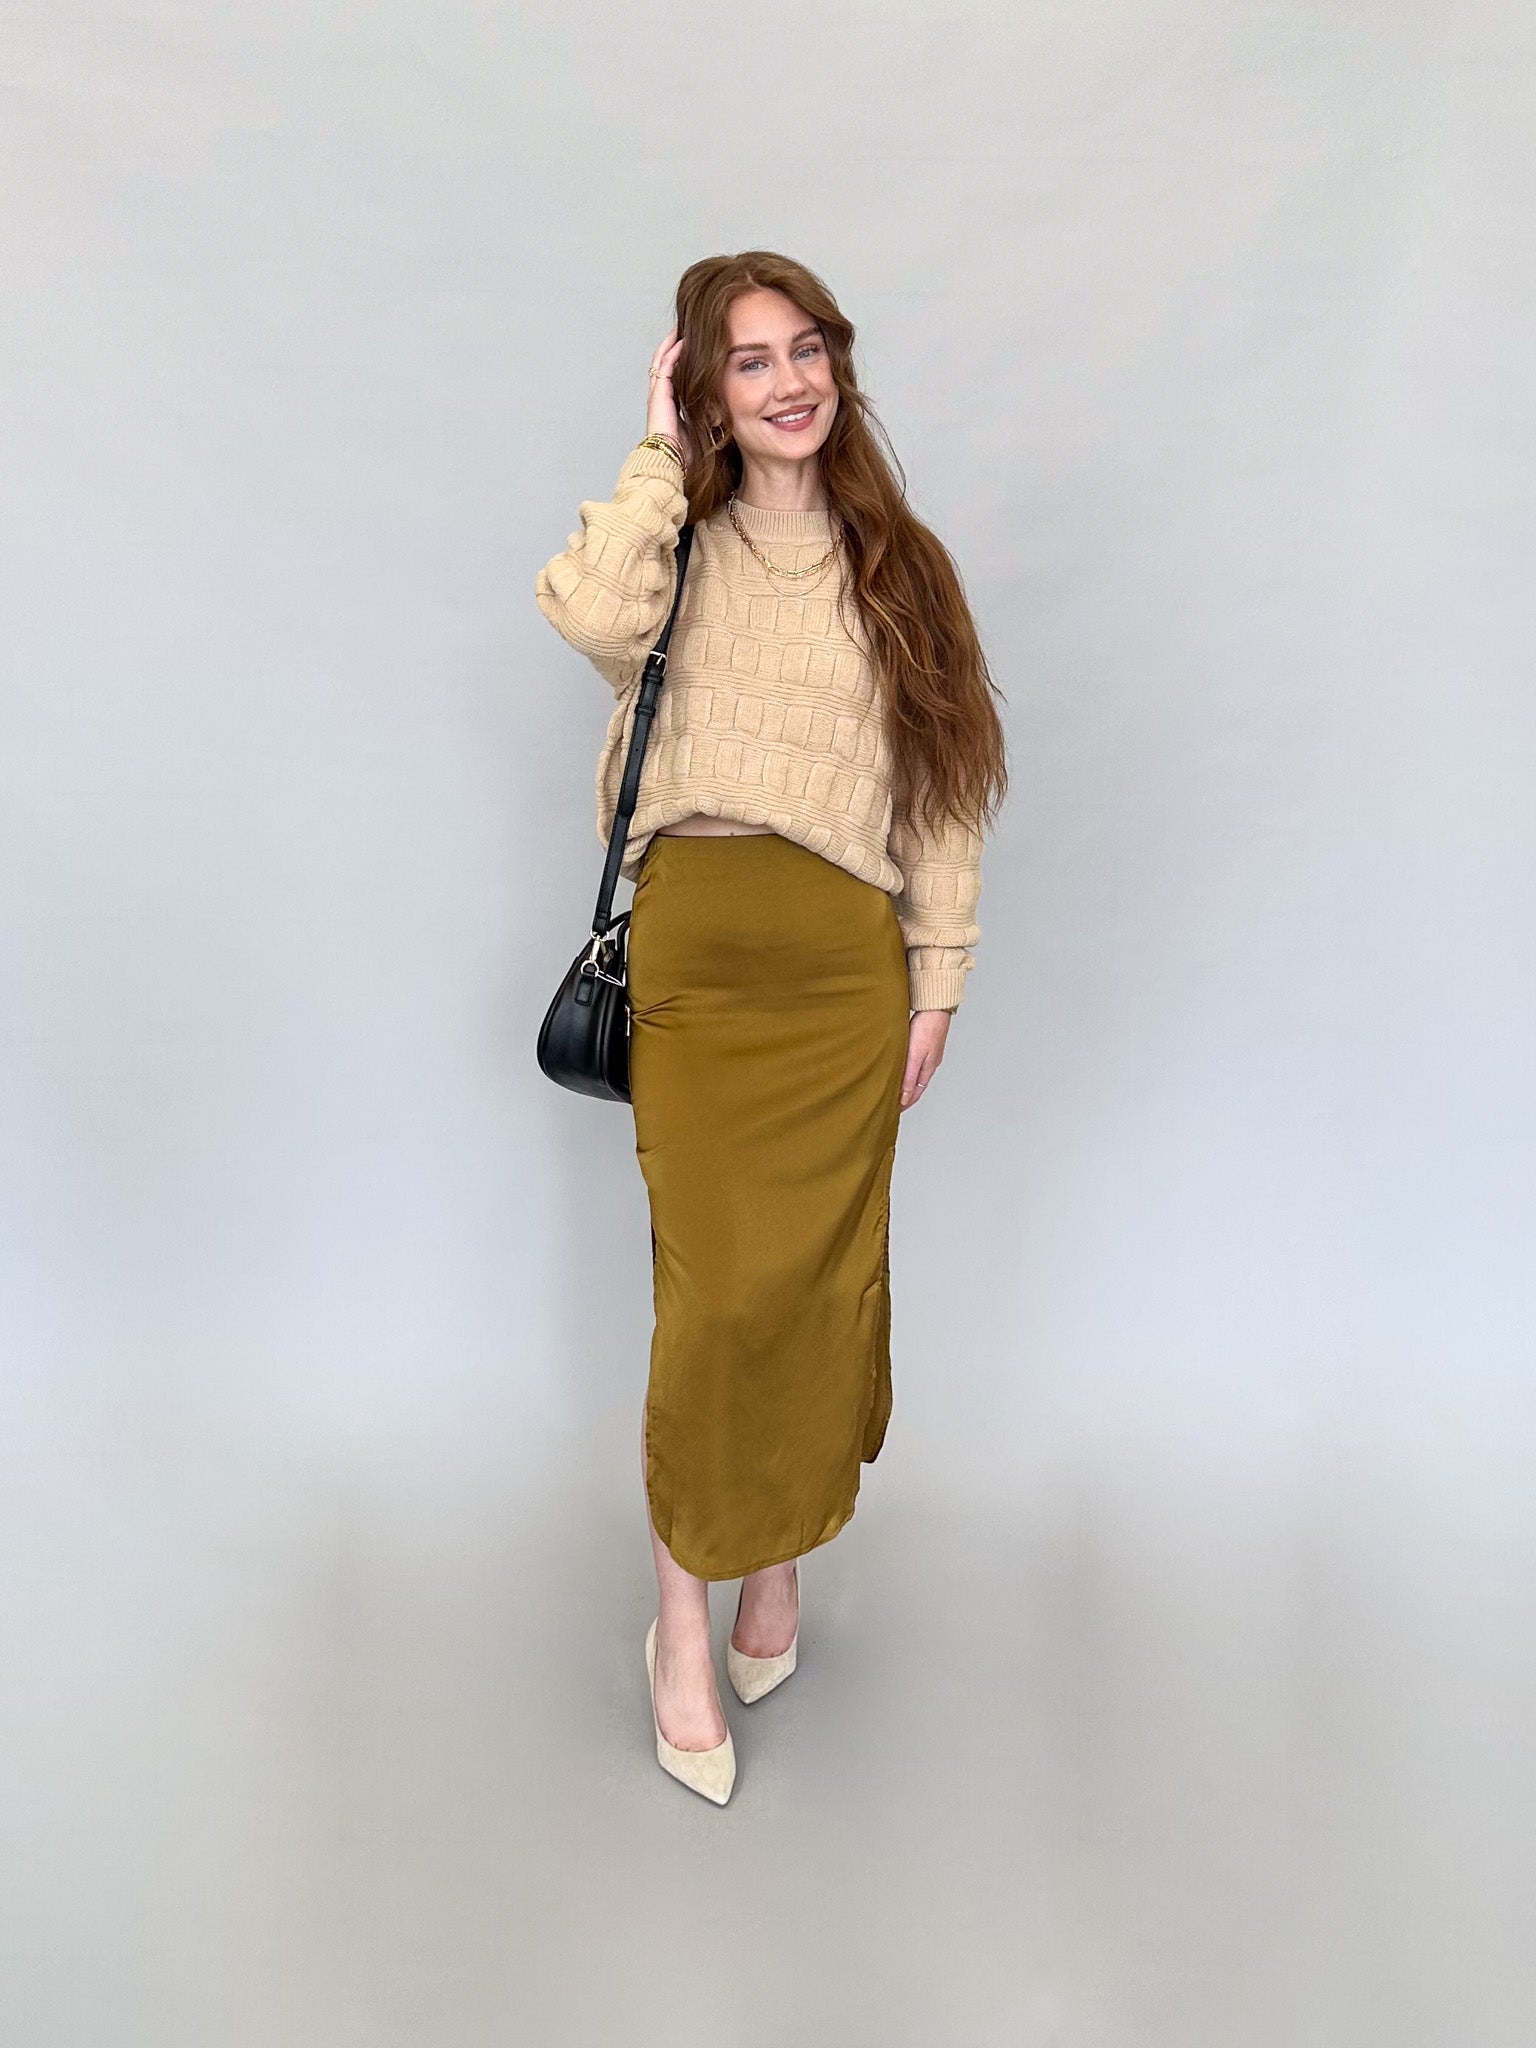 Bring Me To Higher Love Skirt